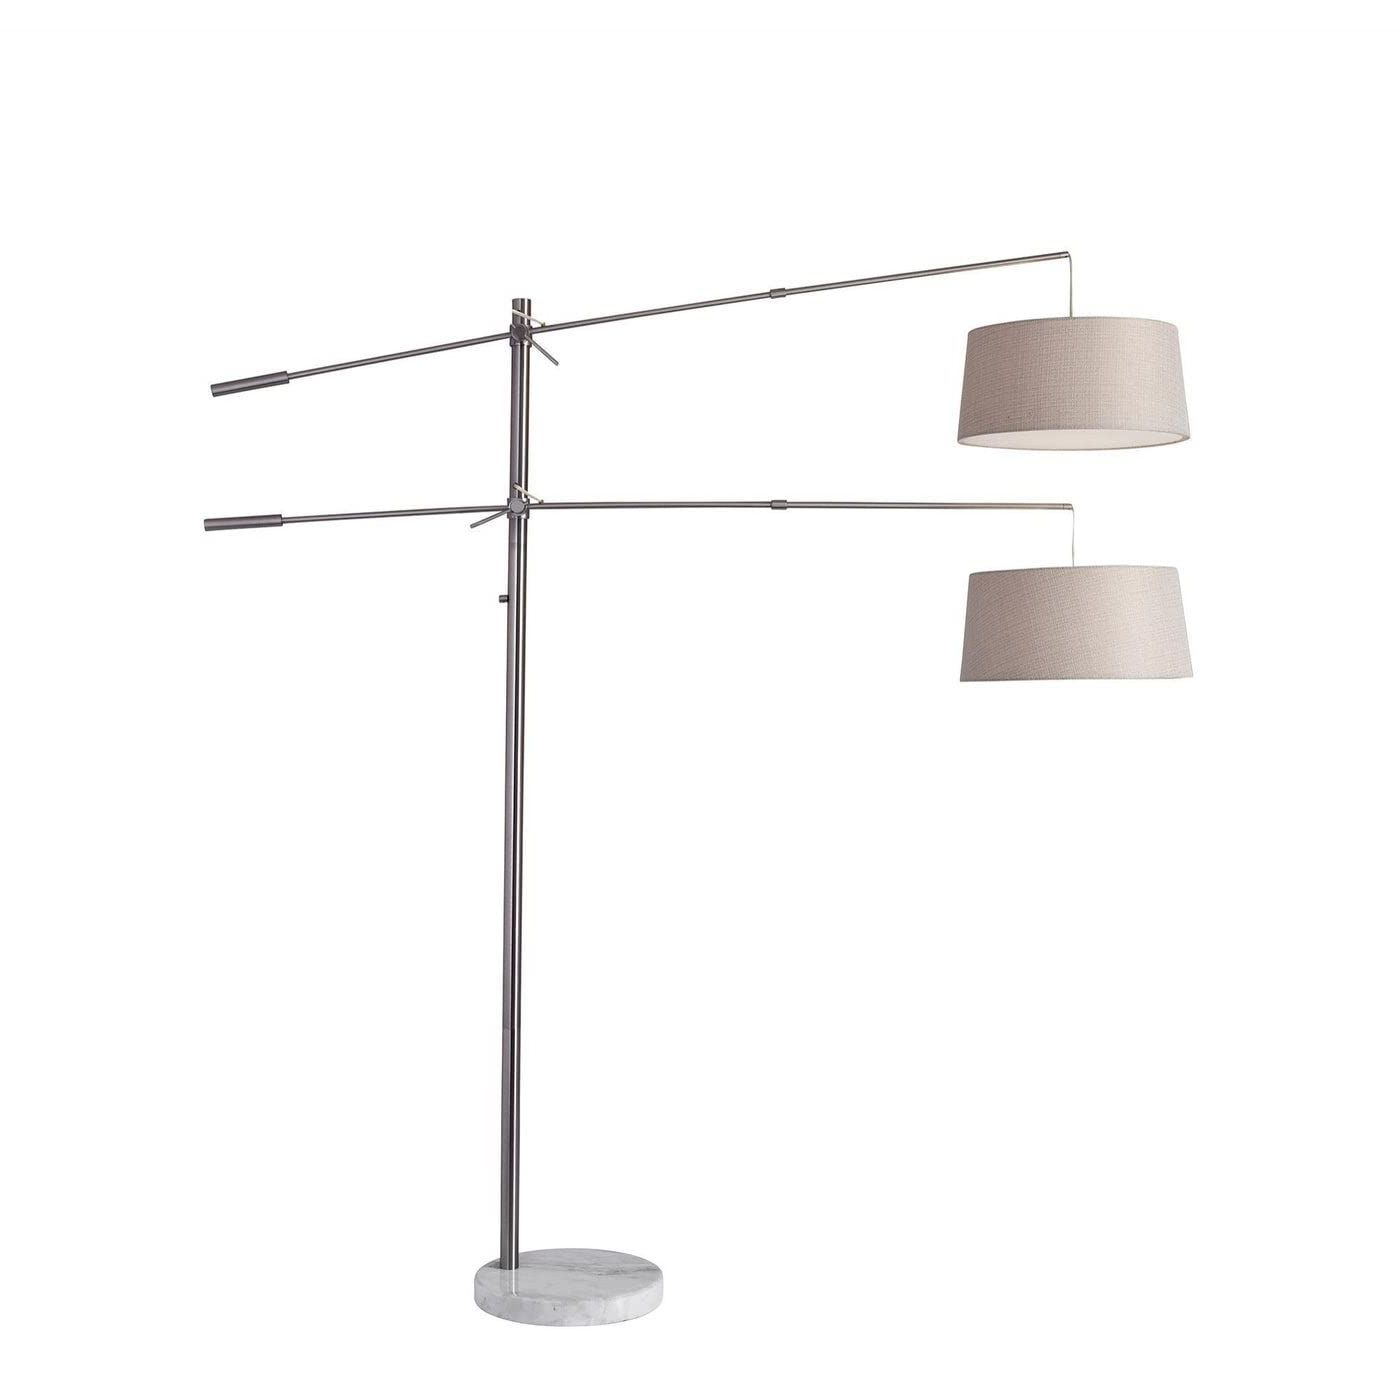 2 Arm Standing Lamps Regarding 2020 Amazon: Adesso 5275 22 Manhattan Two Arm Arc Lamp, 78 102 In, 2 X 150w  Incandescent/ 13w Cfl, Brushed Steel, 1 Floor Lamp : Tools & Home  Improvement (View 2 of 15)